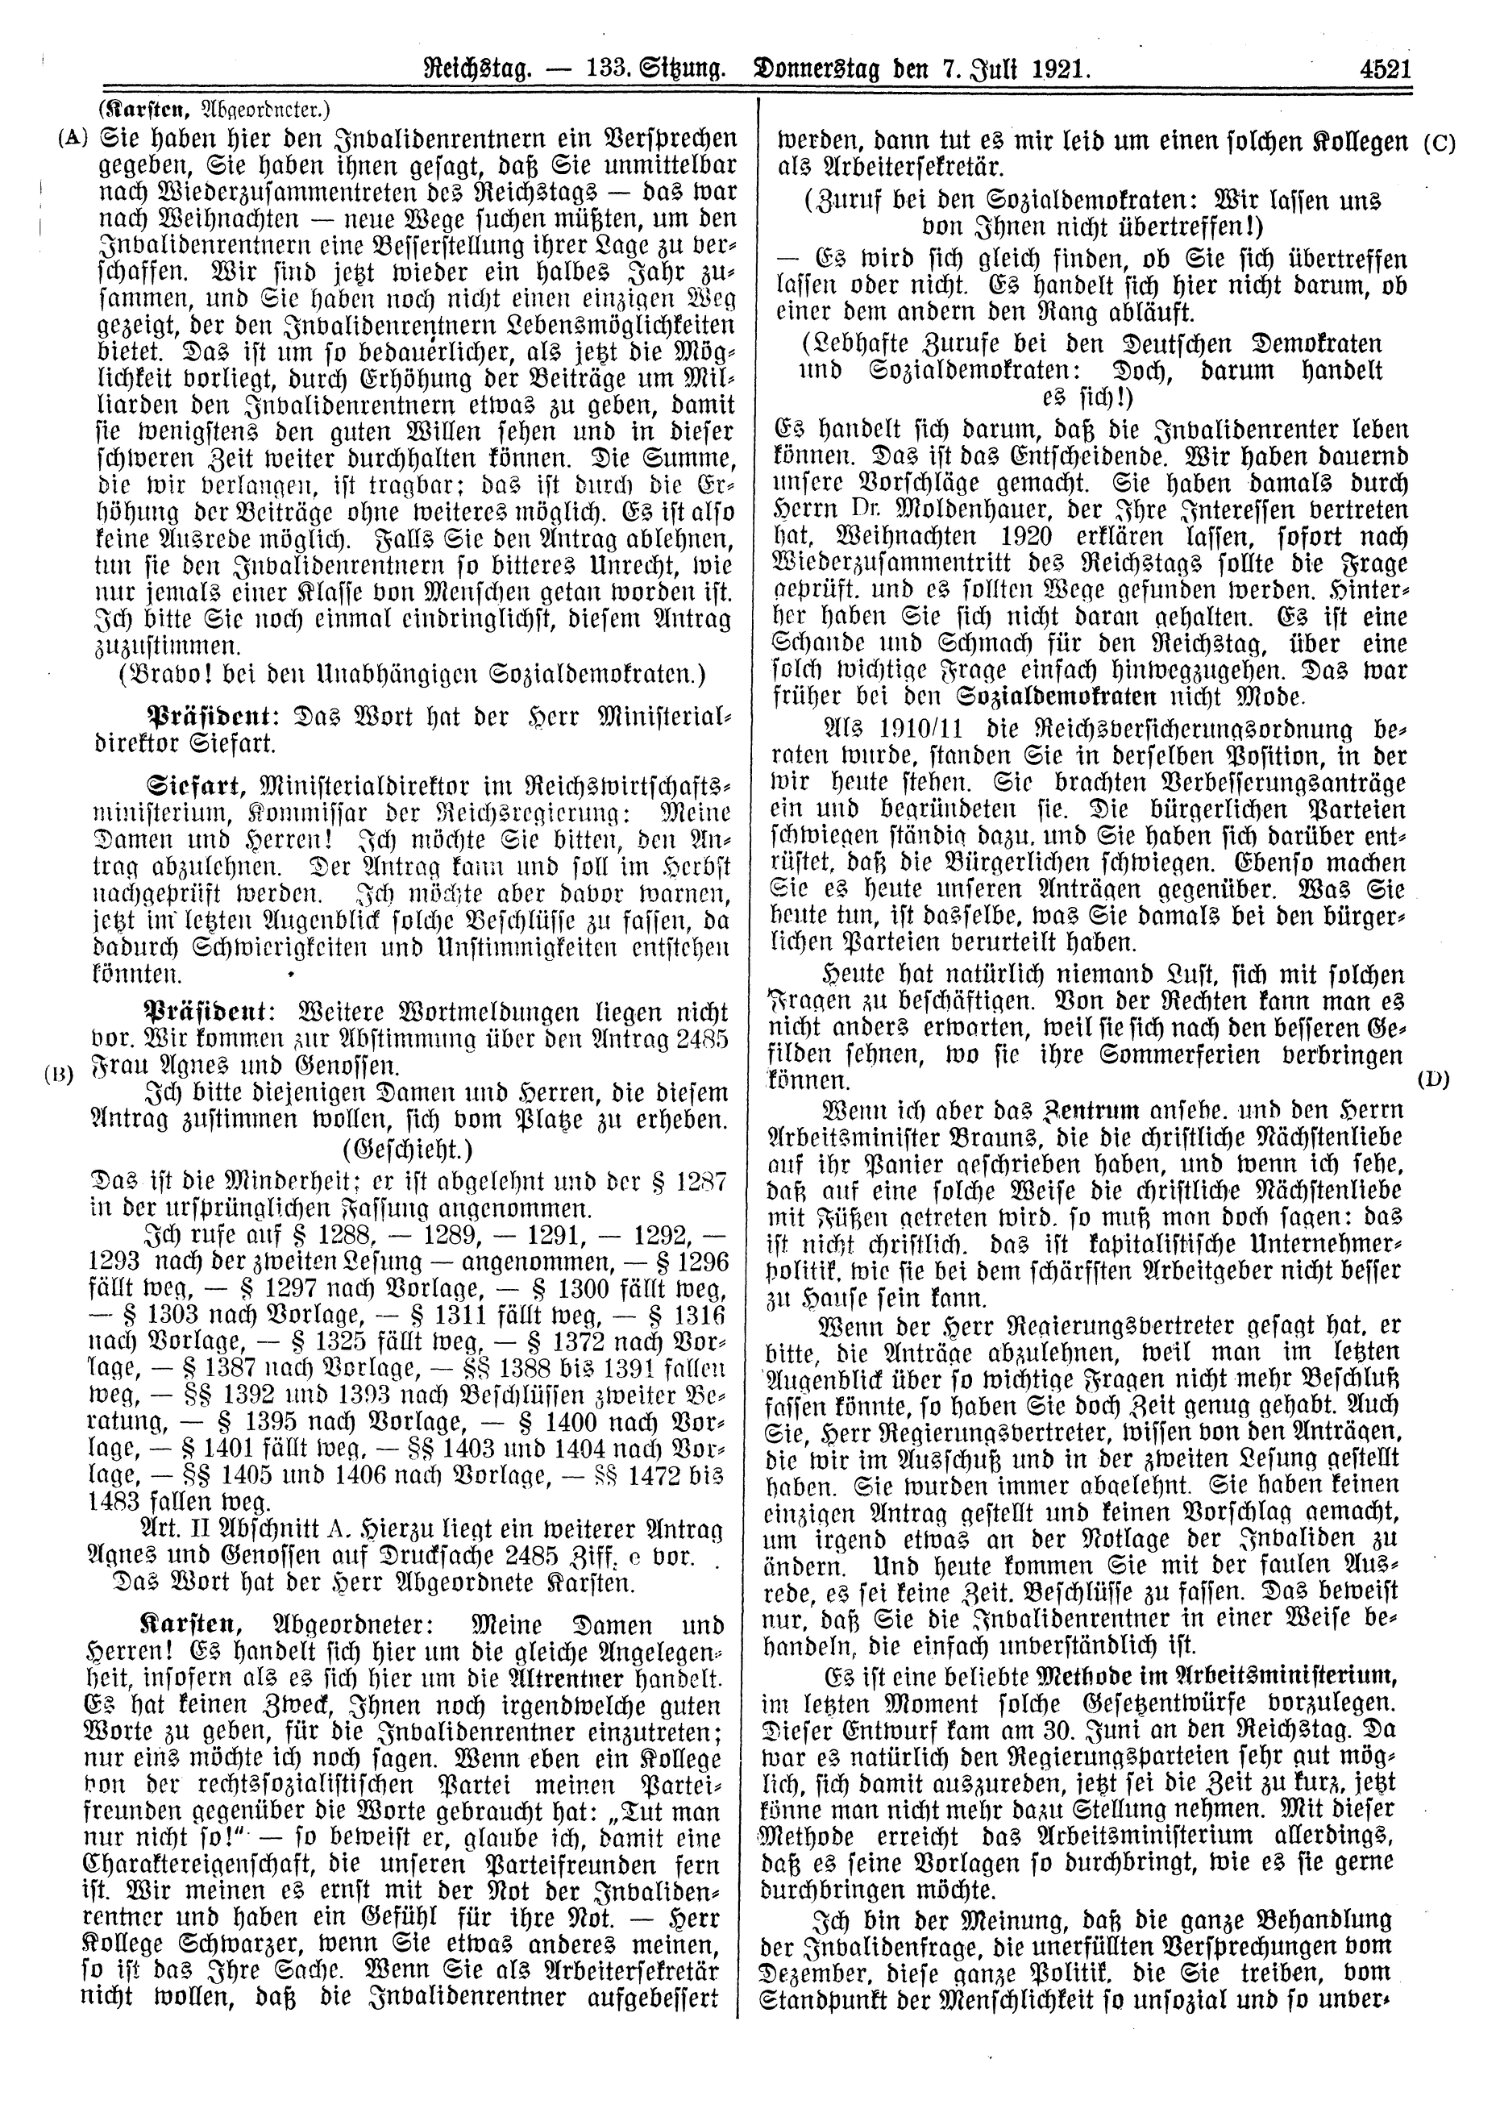 Scan of page 4521